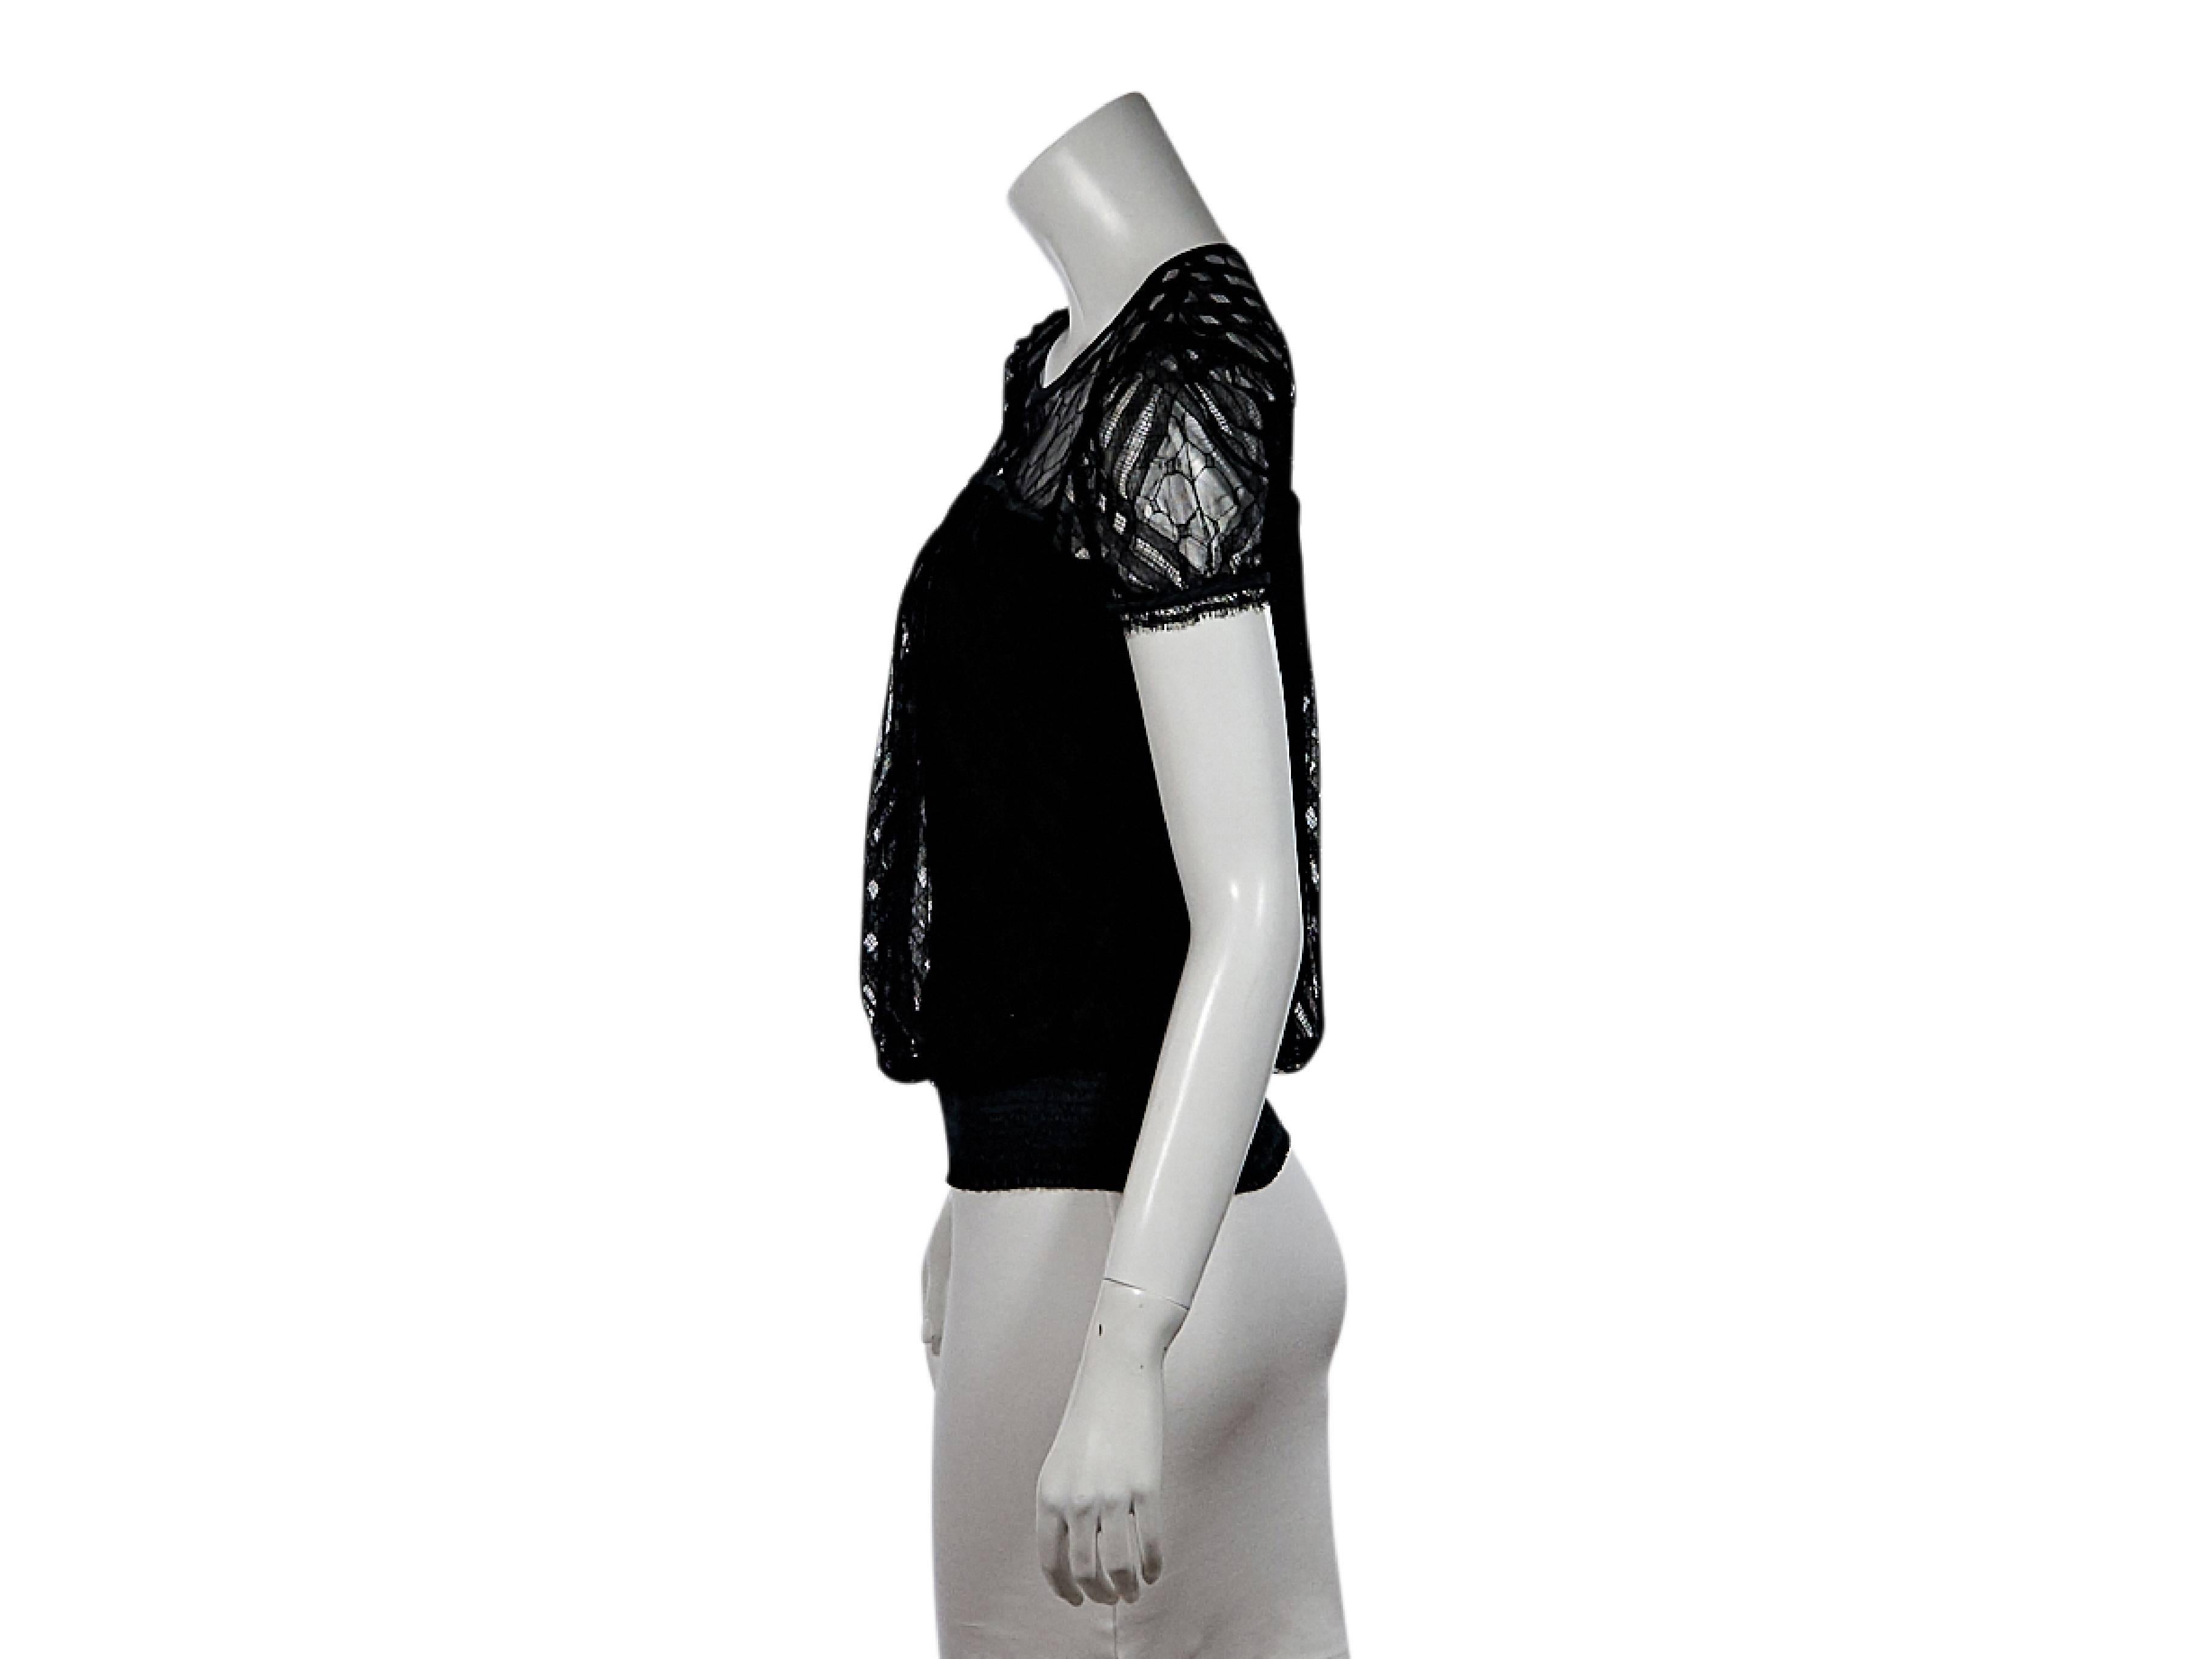 Product details:  Black lace blouse by Chanel.  Jewelneck.  Short sleeves.  Wide hem.  Pullover style.  Size 4
Condition: Pre-owned. Very good.

Est. Retail $ 995.00